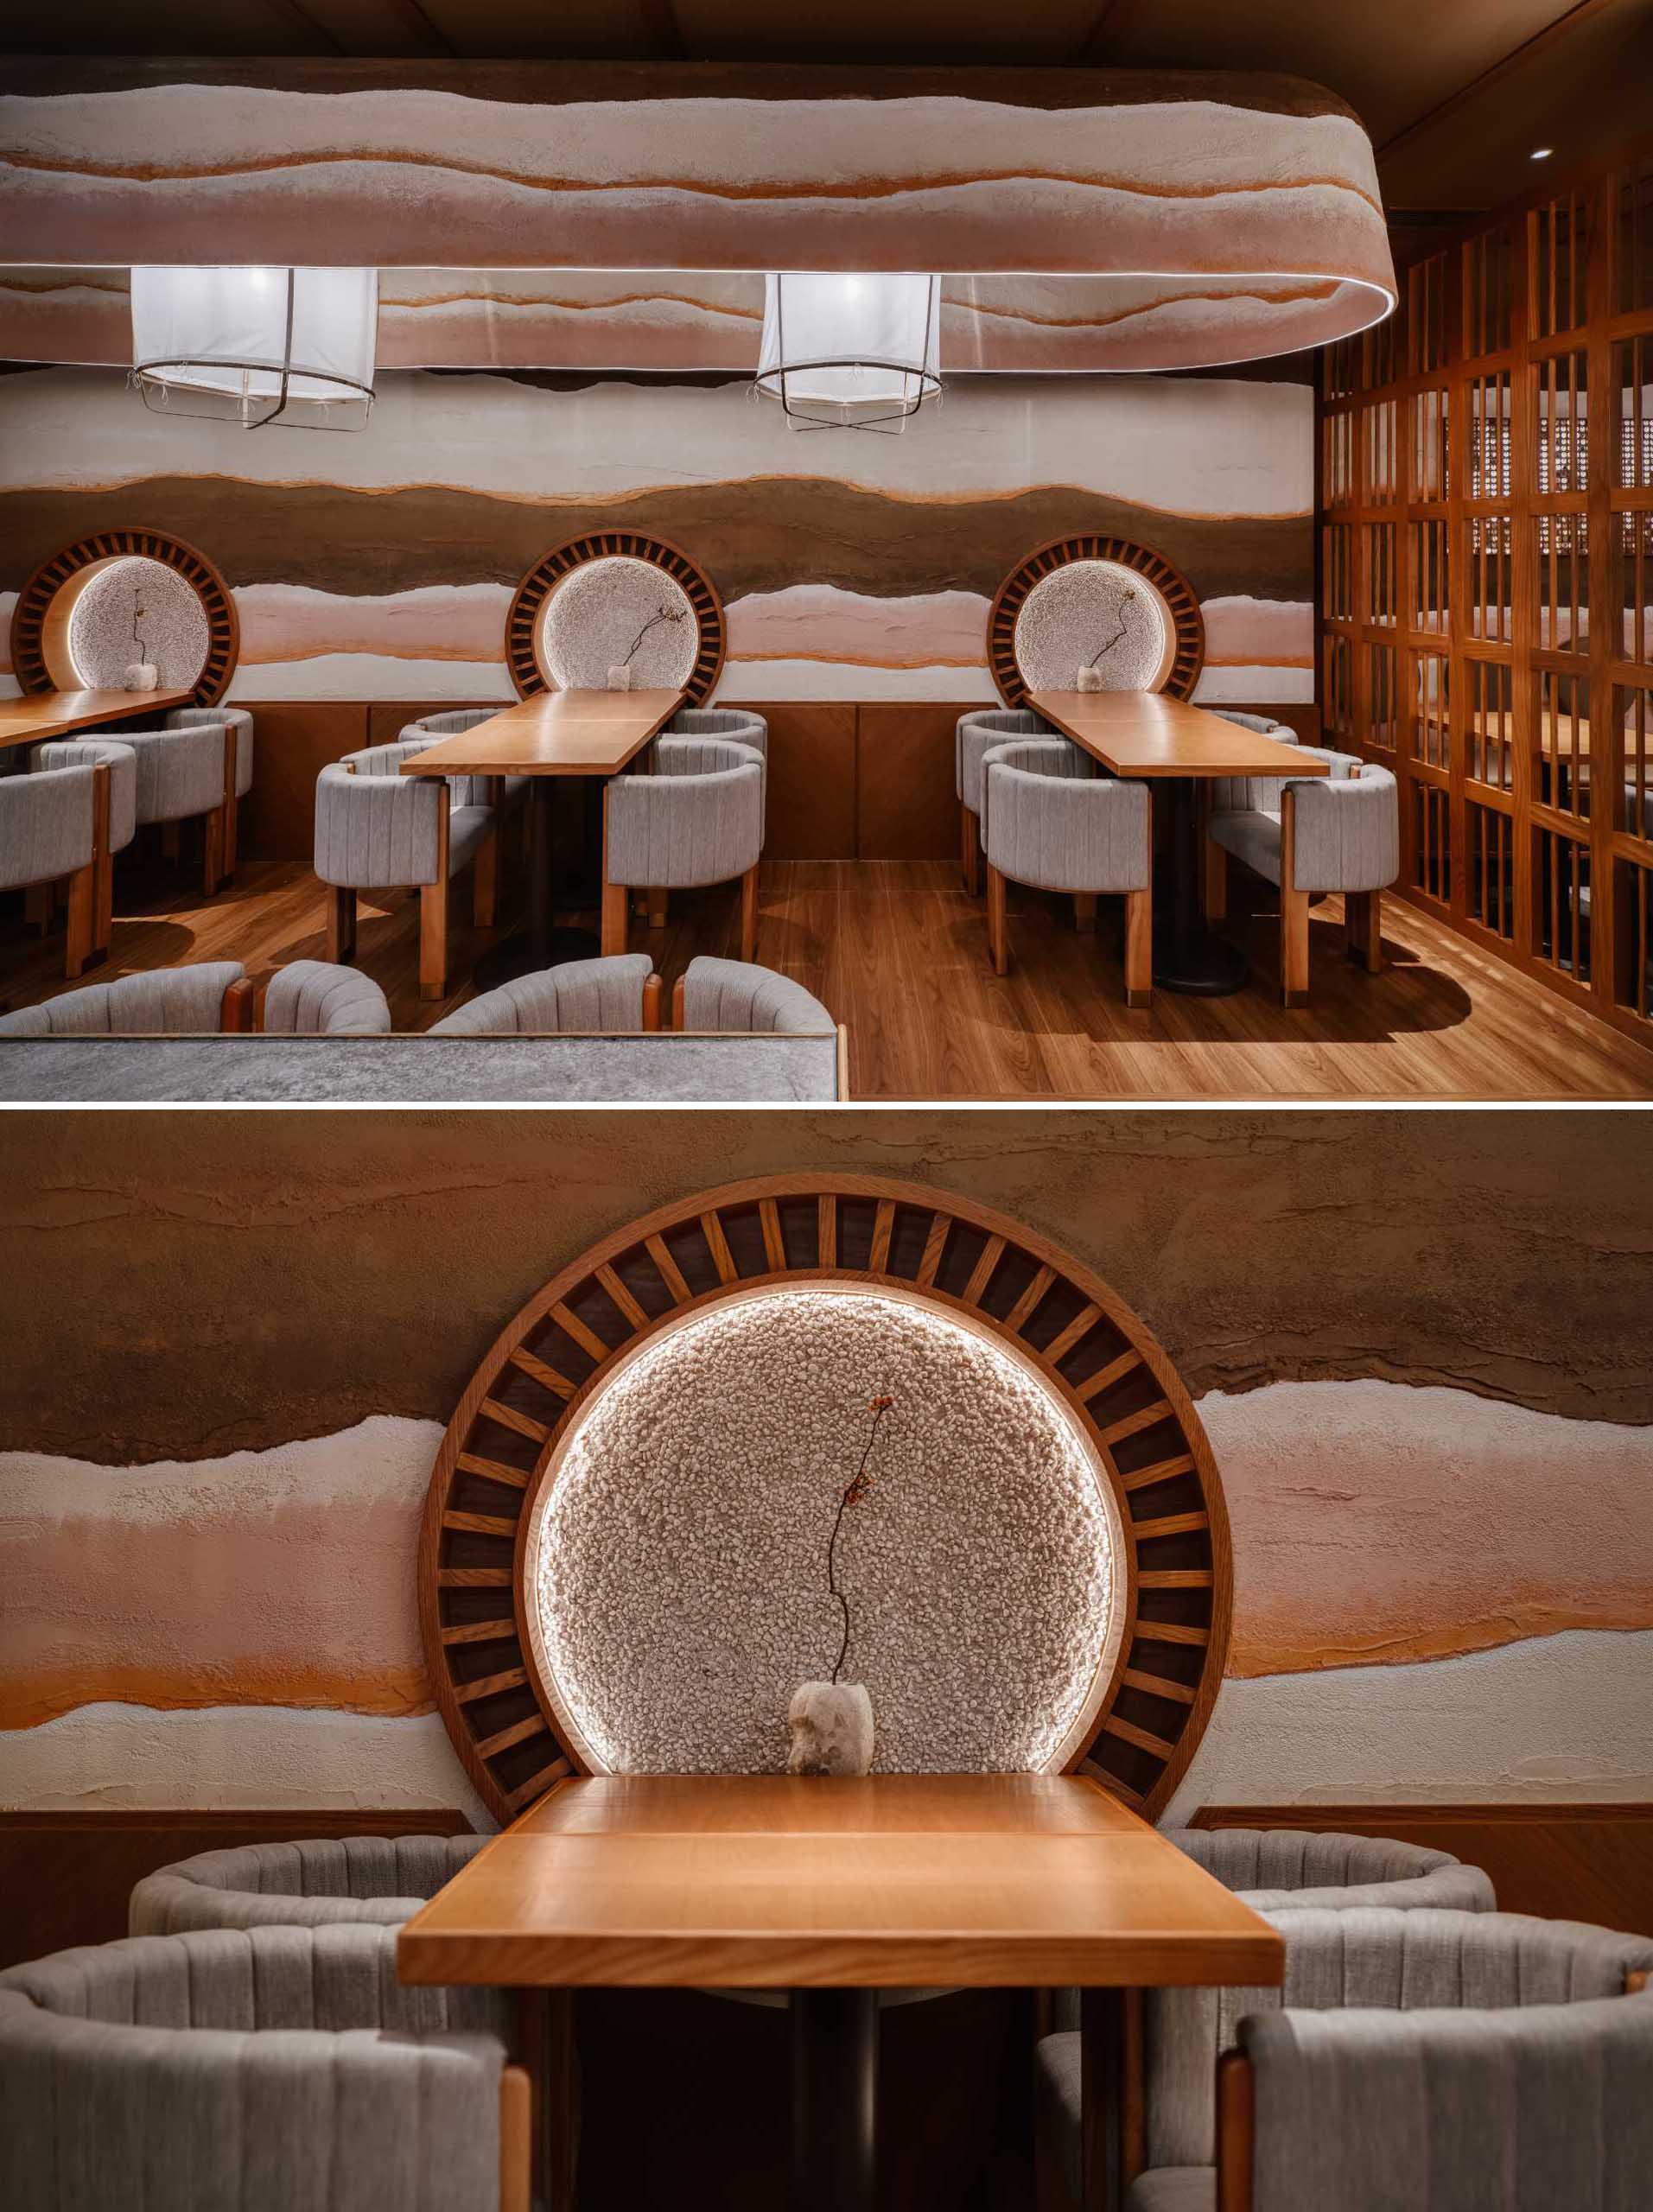 The dining area of this modern restaurant has been inspired by Japanese gardens, featuring ancient Japanese construction materials such as layered clay walls, mudball pebble, and timber.